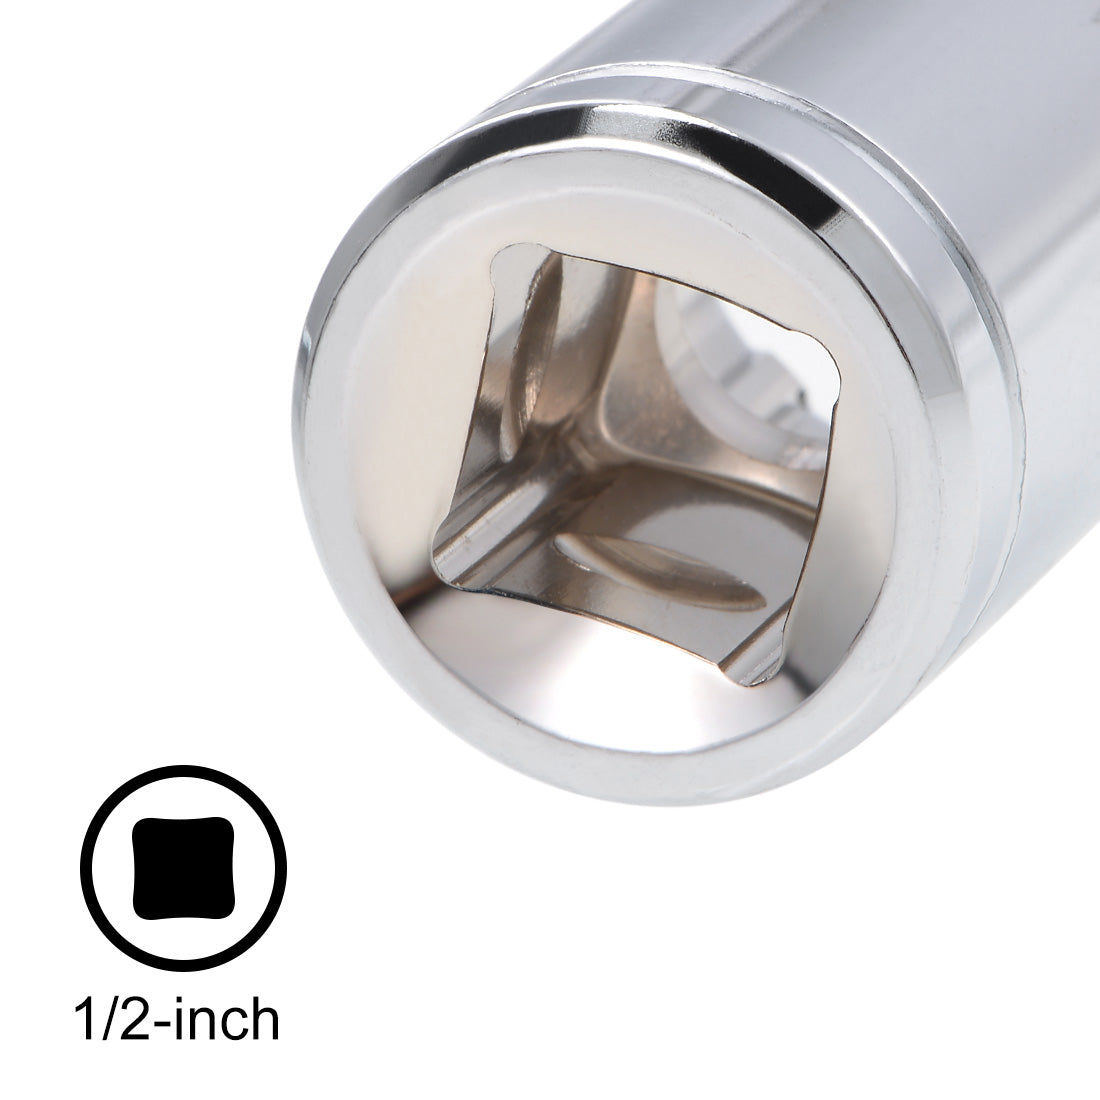 uxcell Uxcell 1/2-inch Drive E17 Universal Spline Socket Shallow 12 Point Cr-V Steel